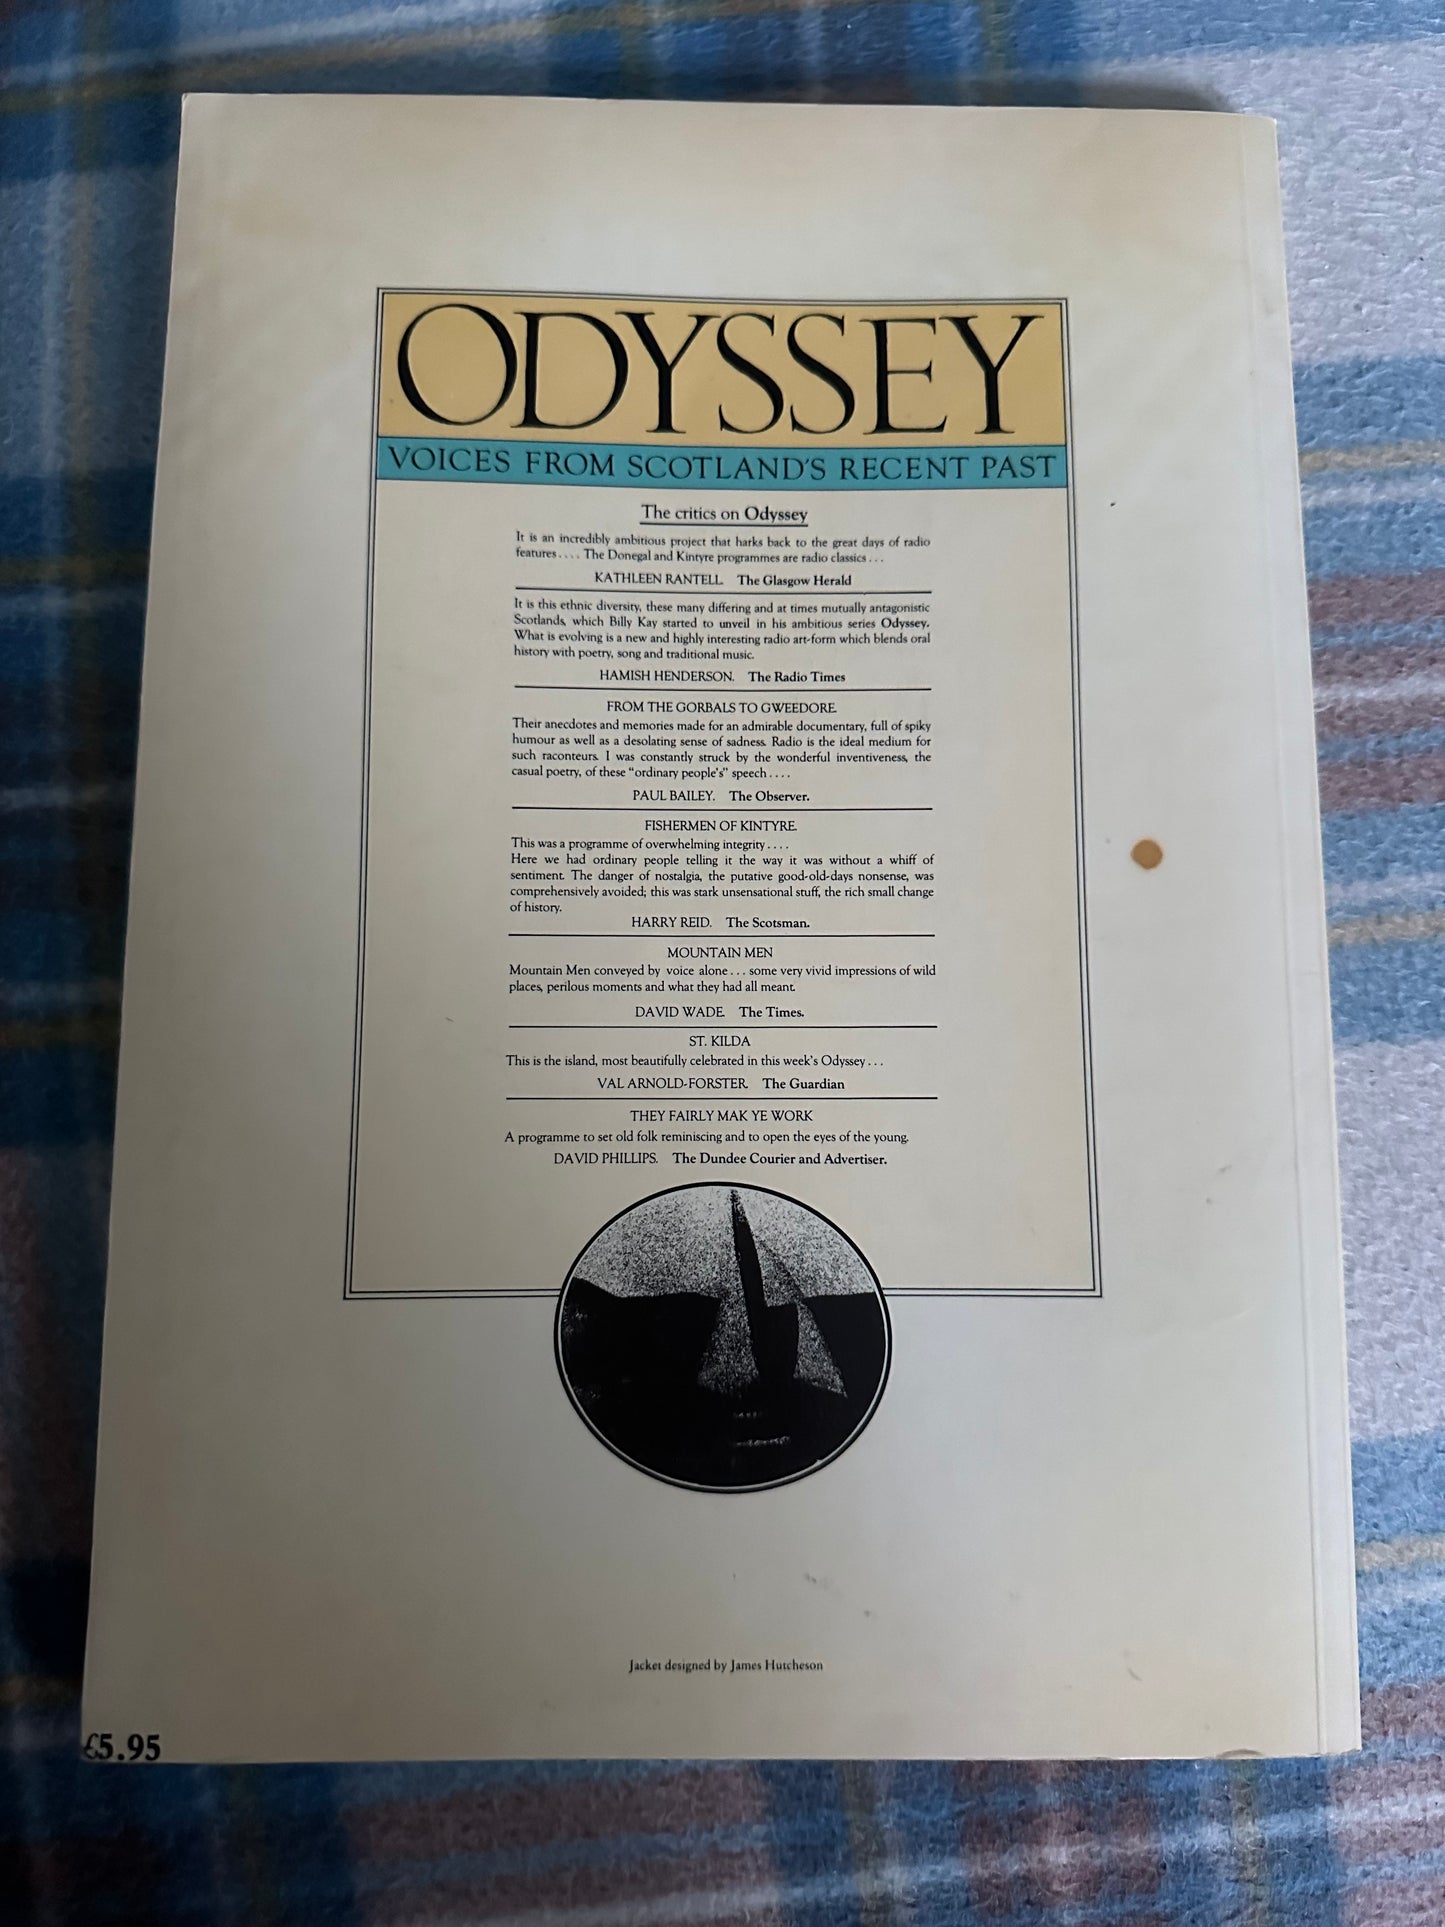 1980*1st* Odyssey Voices From Scotland’s Recent Past - Billy Kay(Polygon Books)